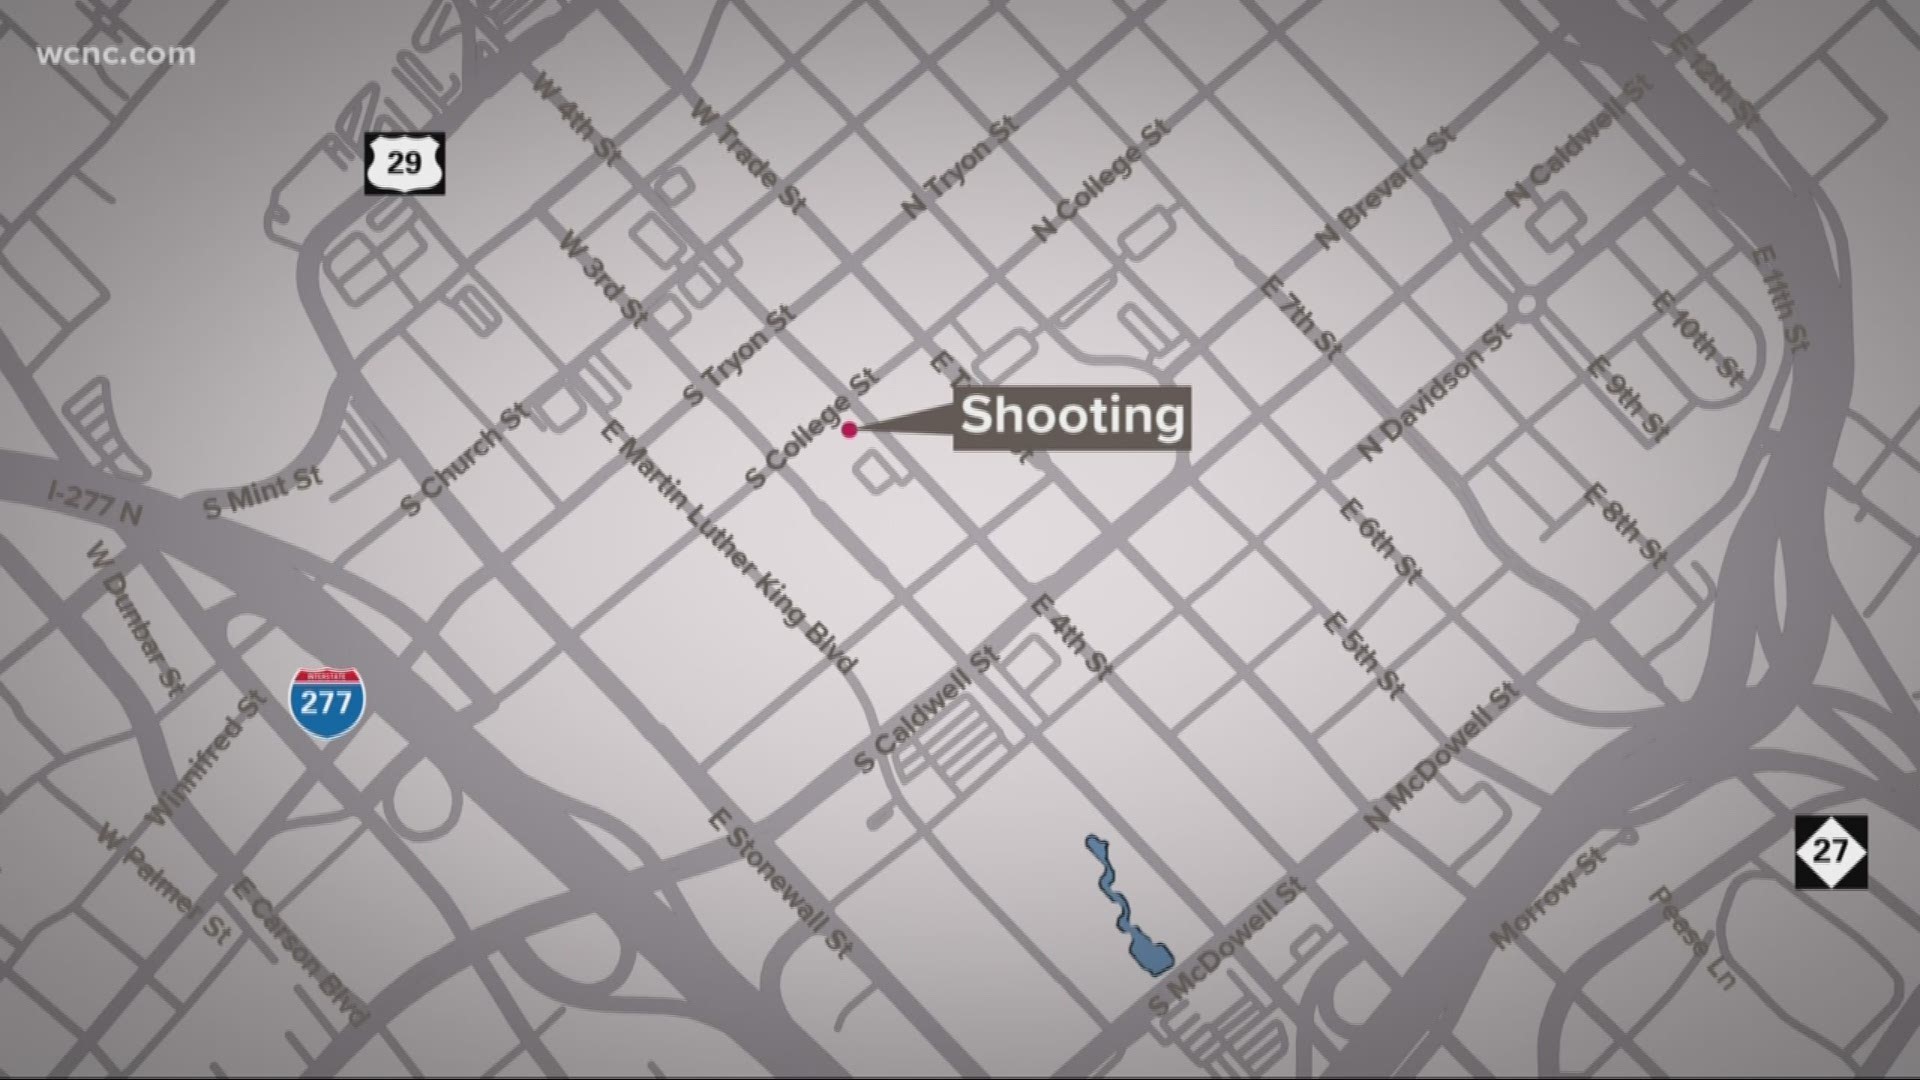 Police said two men were fighting near a parking garage when a third person nearby shot one of them.